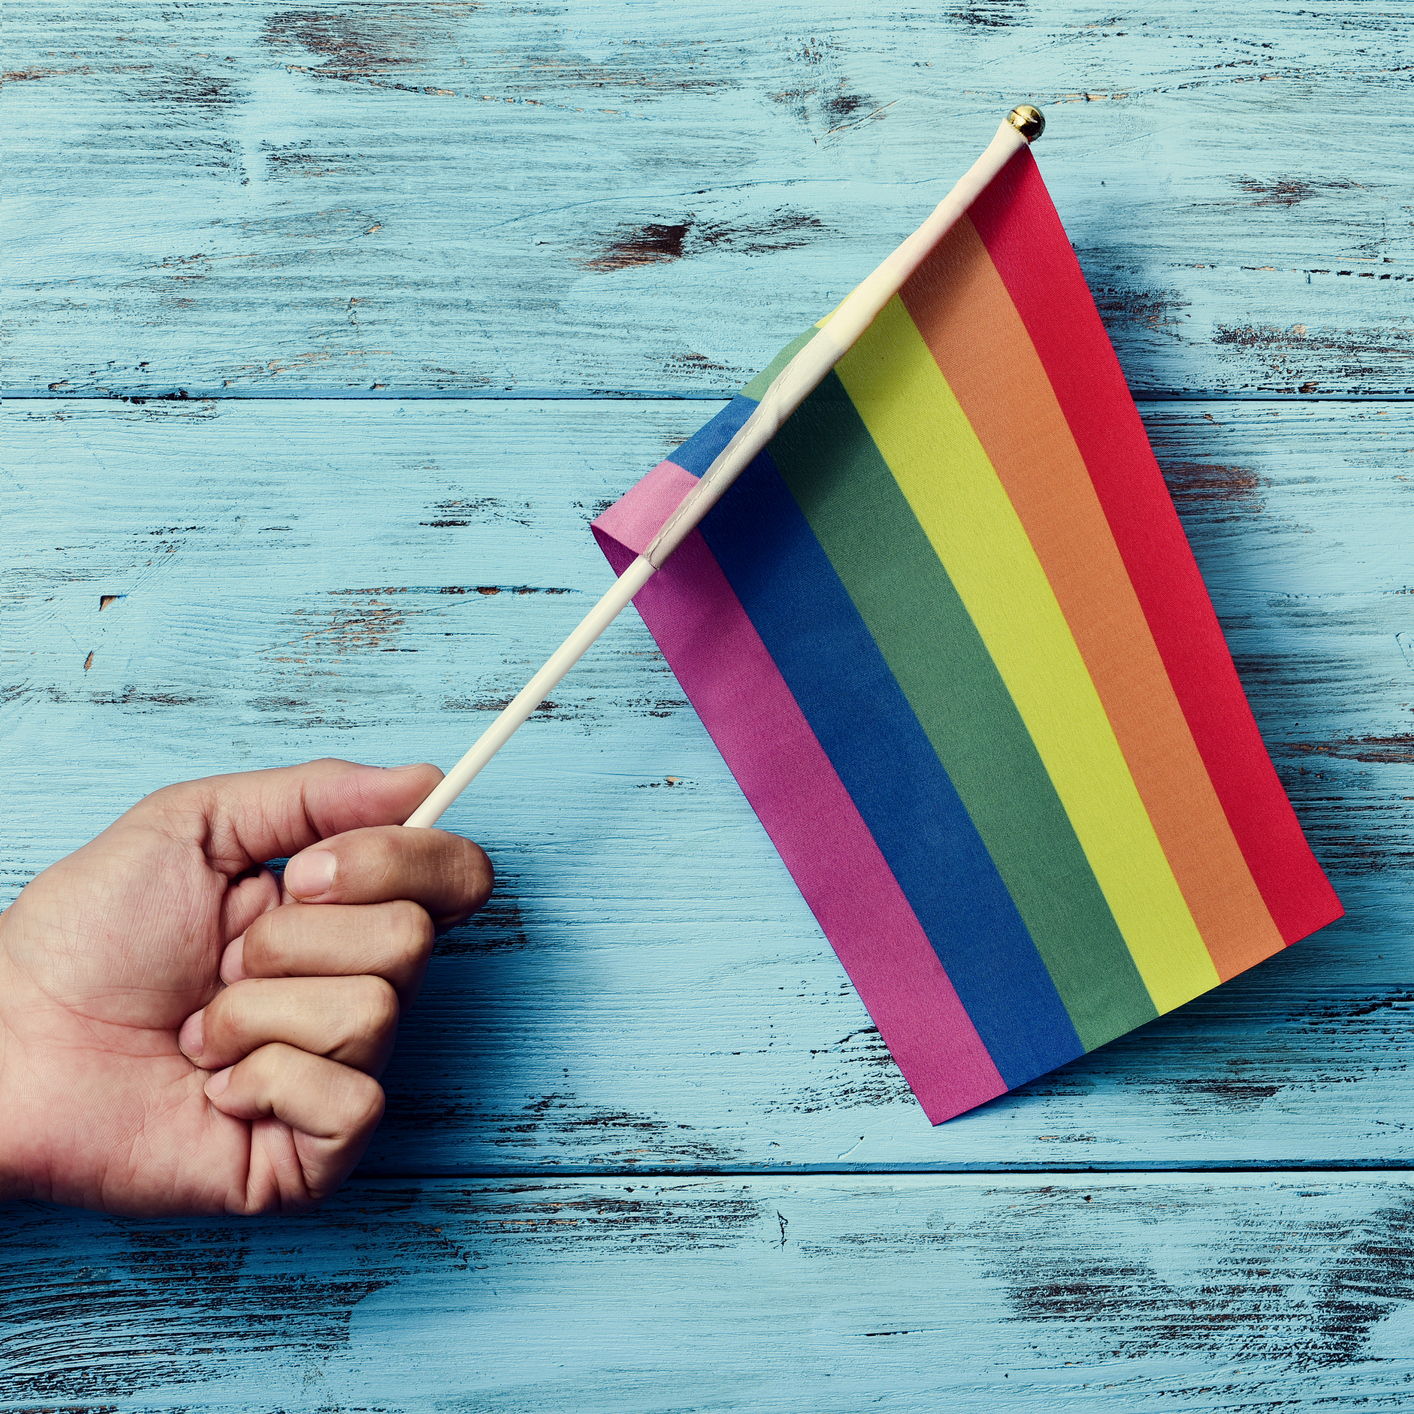 Someone holding a rainbow flag against a blue background.